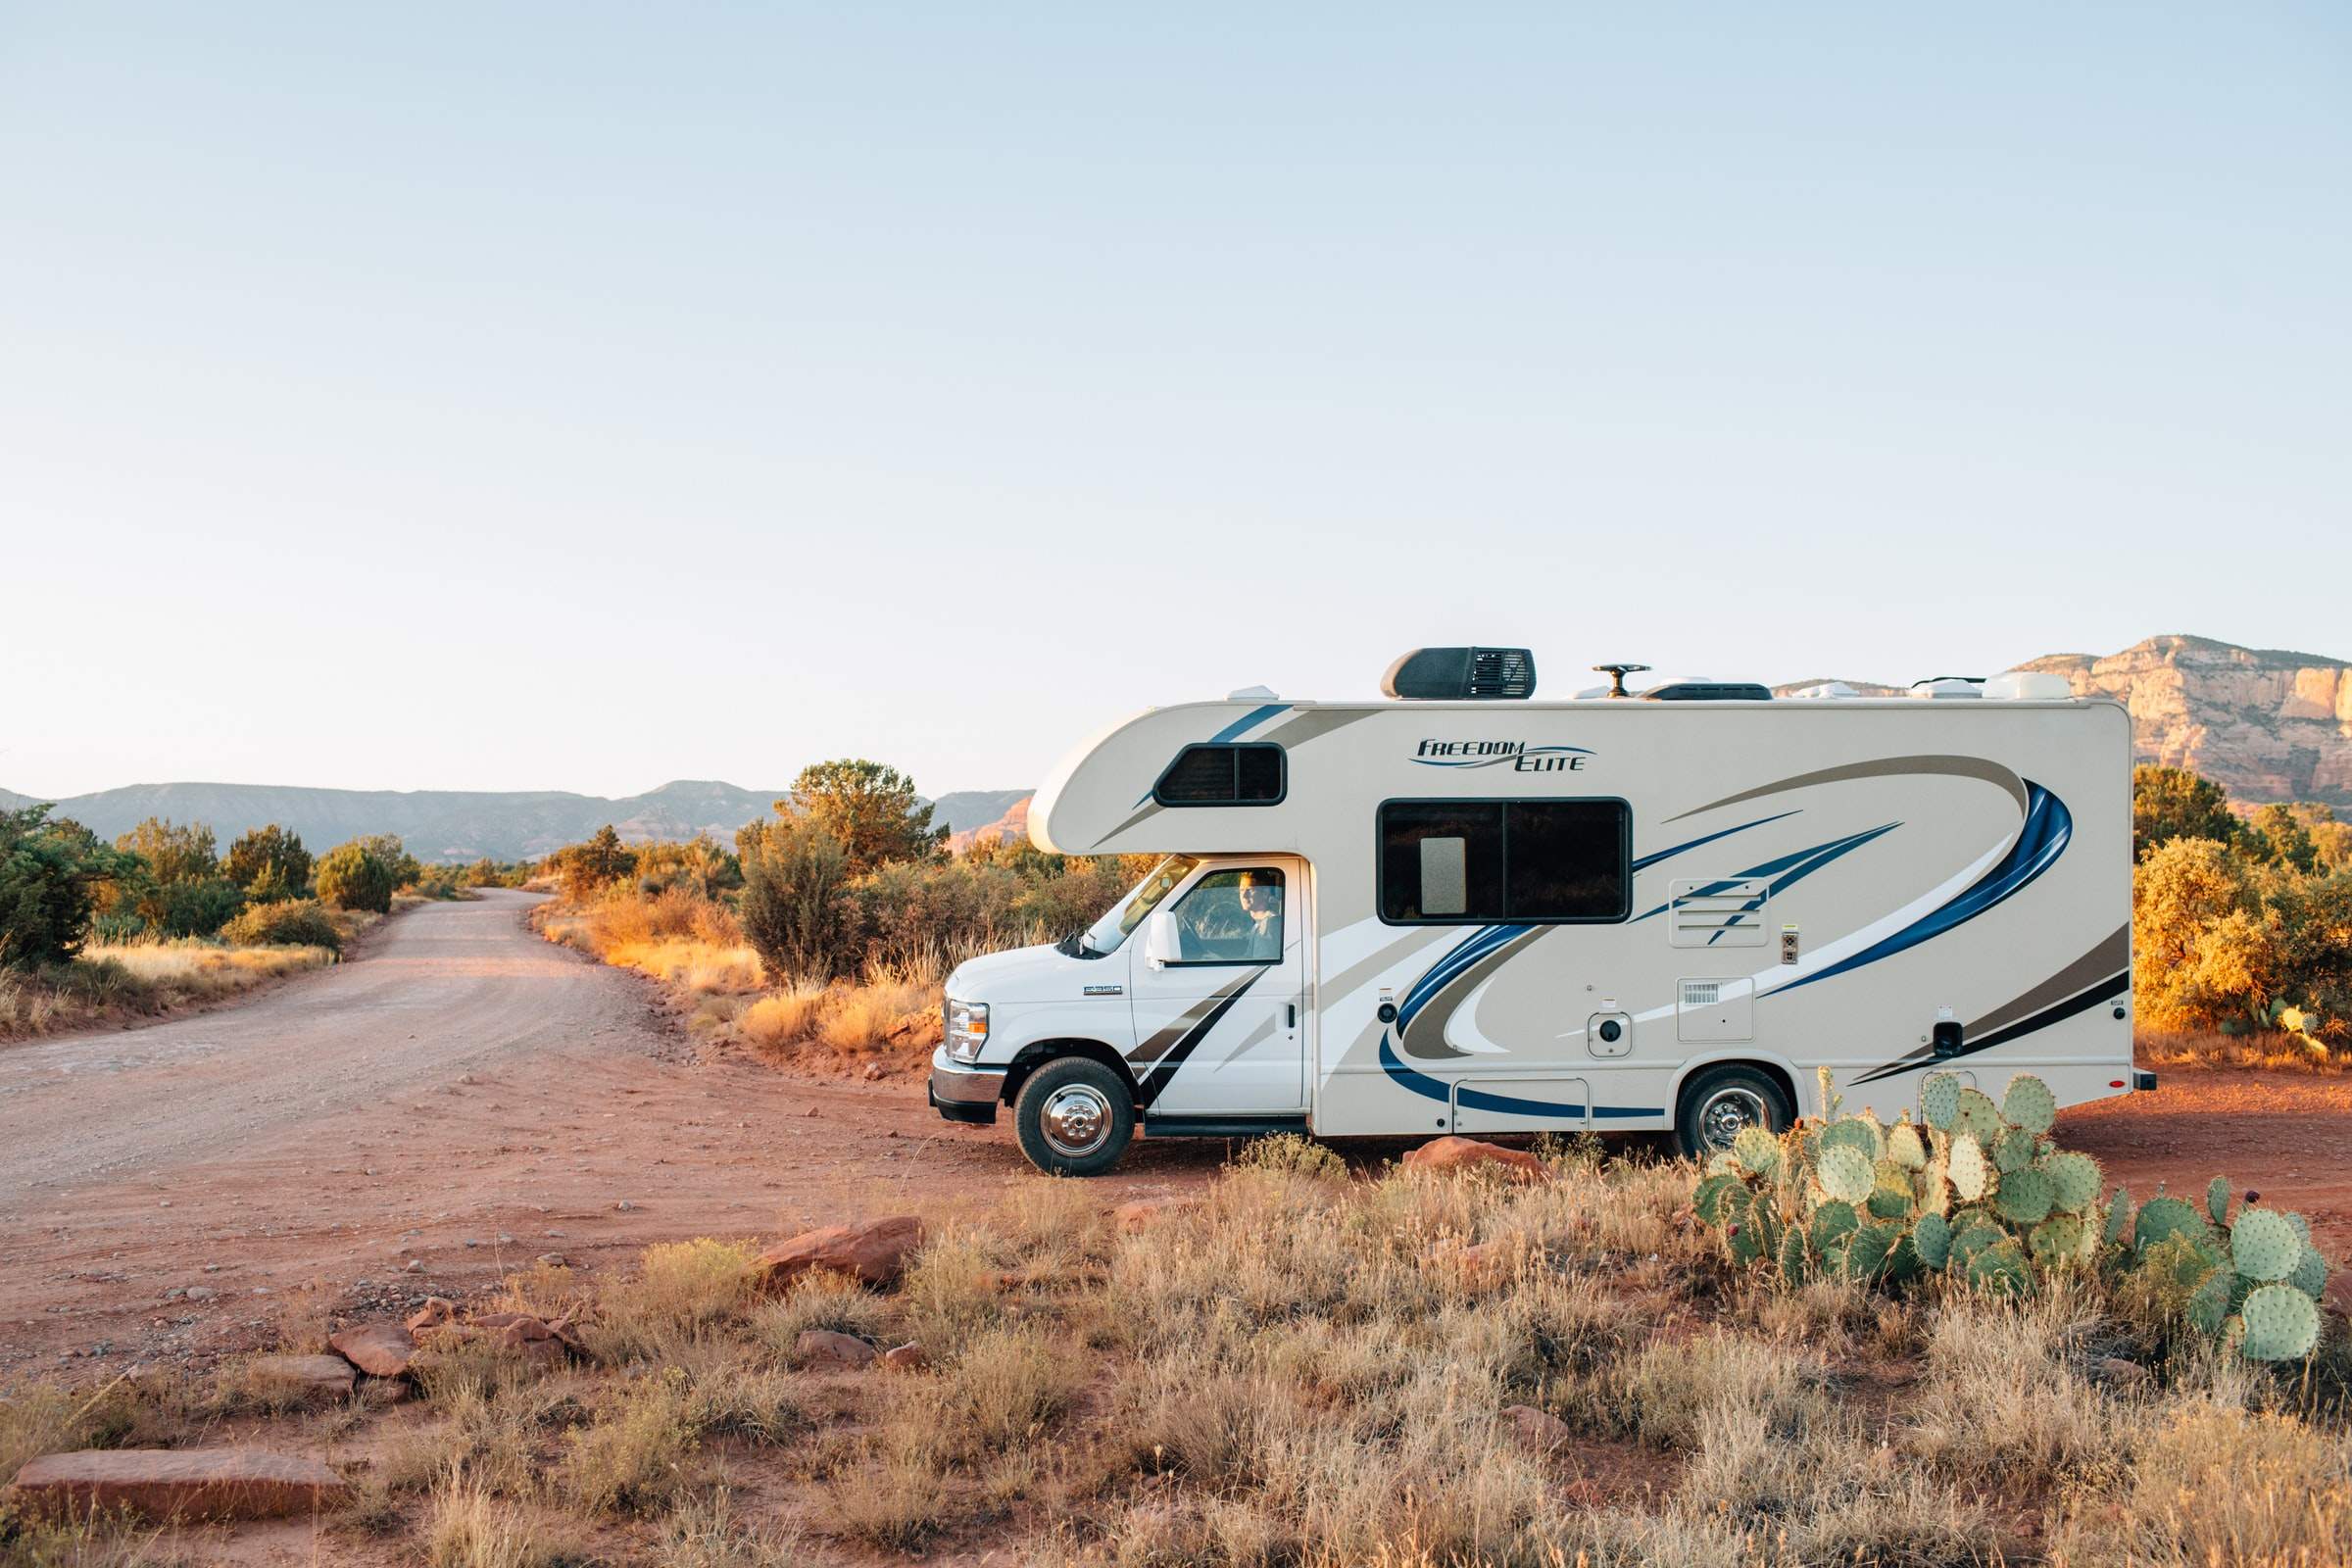 RV park rates: How much does it cost to RV camp?